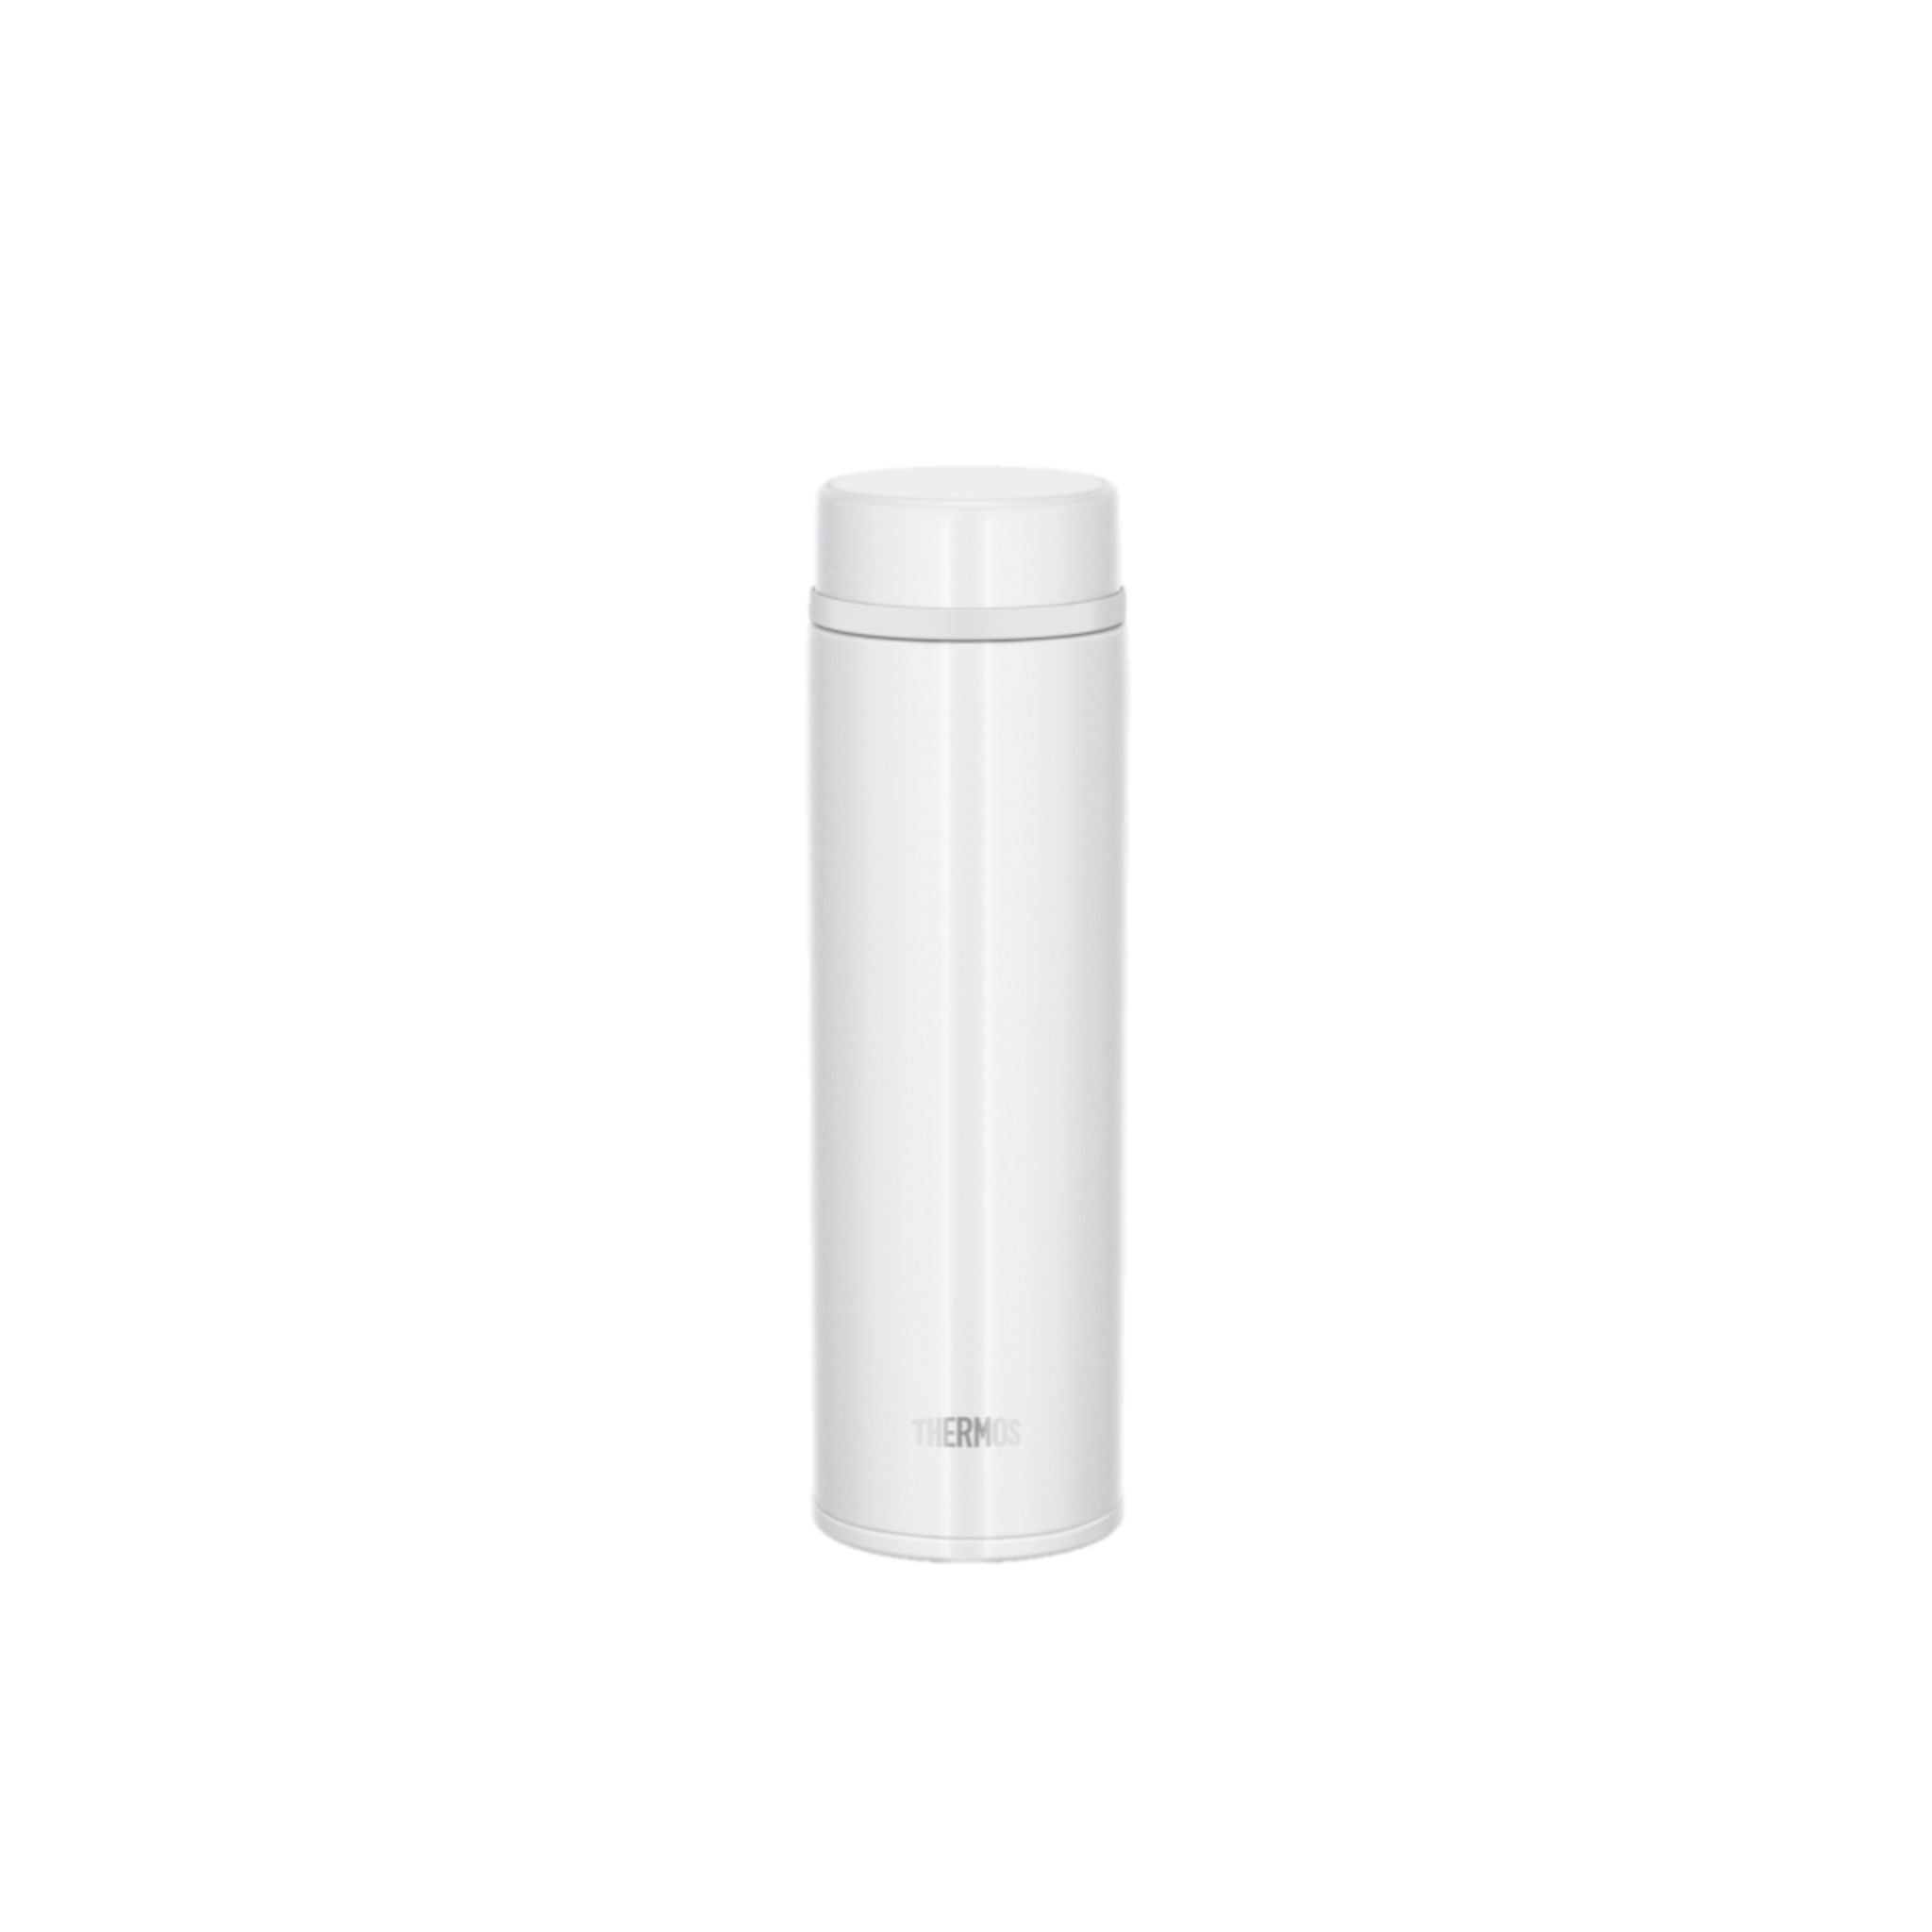 Thermos 0.48L Stainless Steel Vacuum Insulation Tumbler - Pearl White (JNW-480PRW)